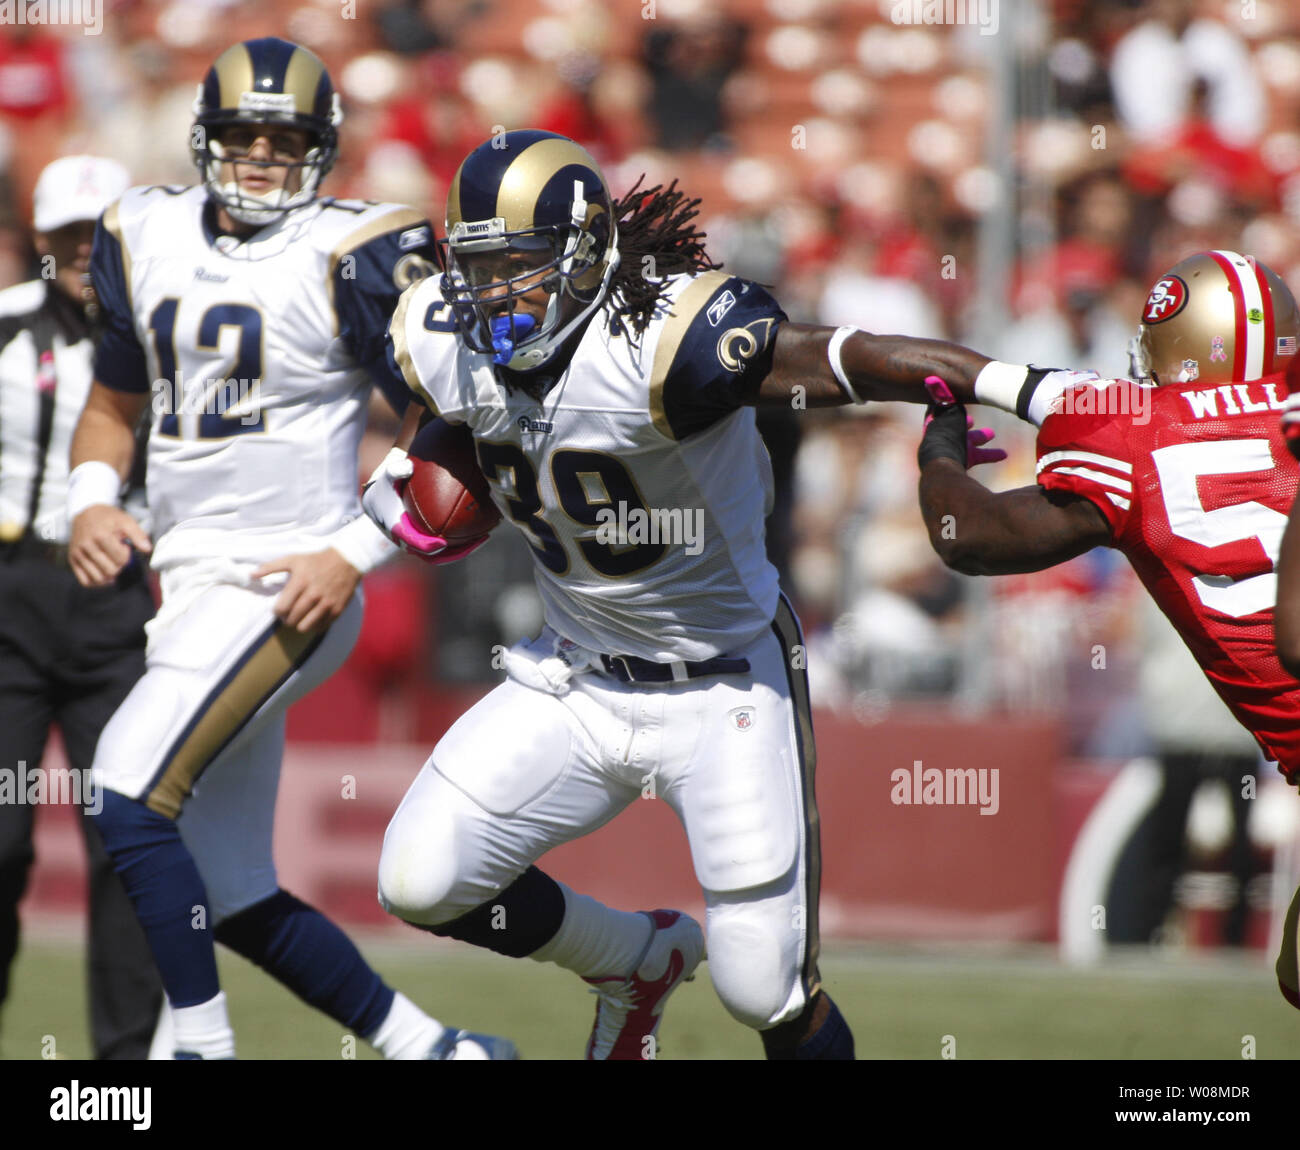 St. Louis Rams RB Steven Jackson (39) throws a straight arm at San Francisco 49ers Patrick Willis (R) as QB Kyle Boller (12) watches at Candlestick Park in San Francisco on October 4, 2009. The 49ers defeated the Rams 35-0.    UPI/Terry Schmitt Stock Photo